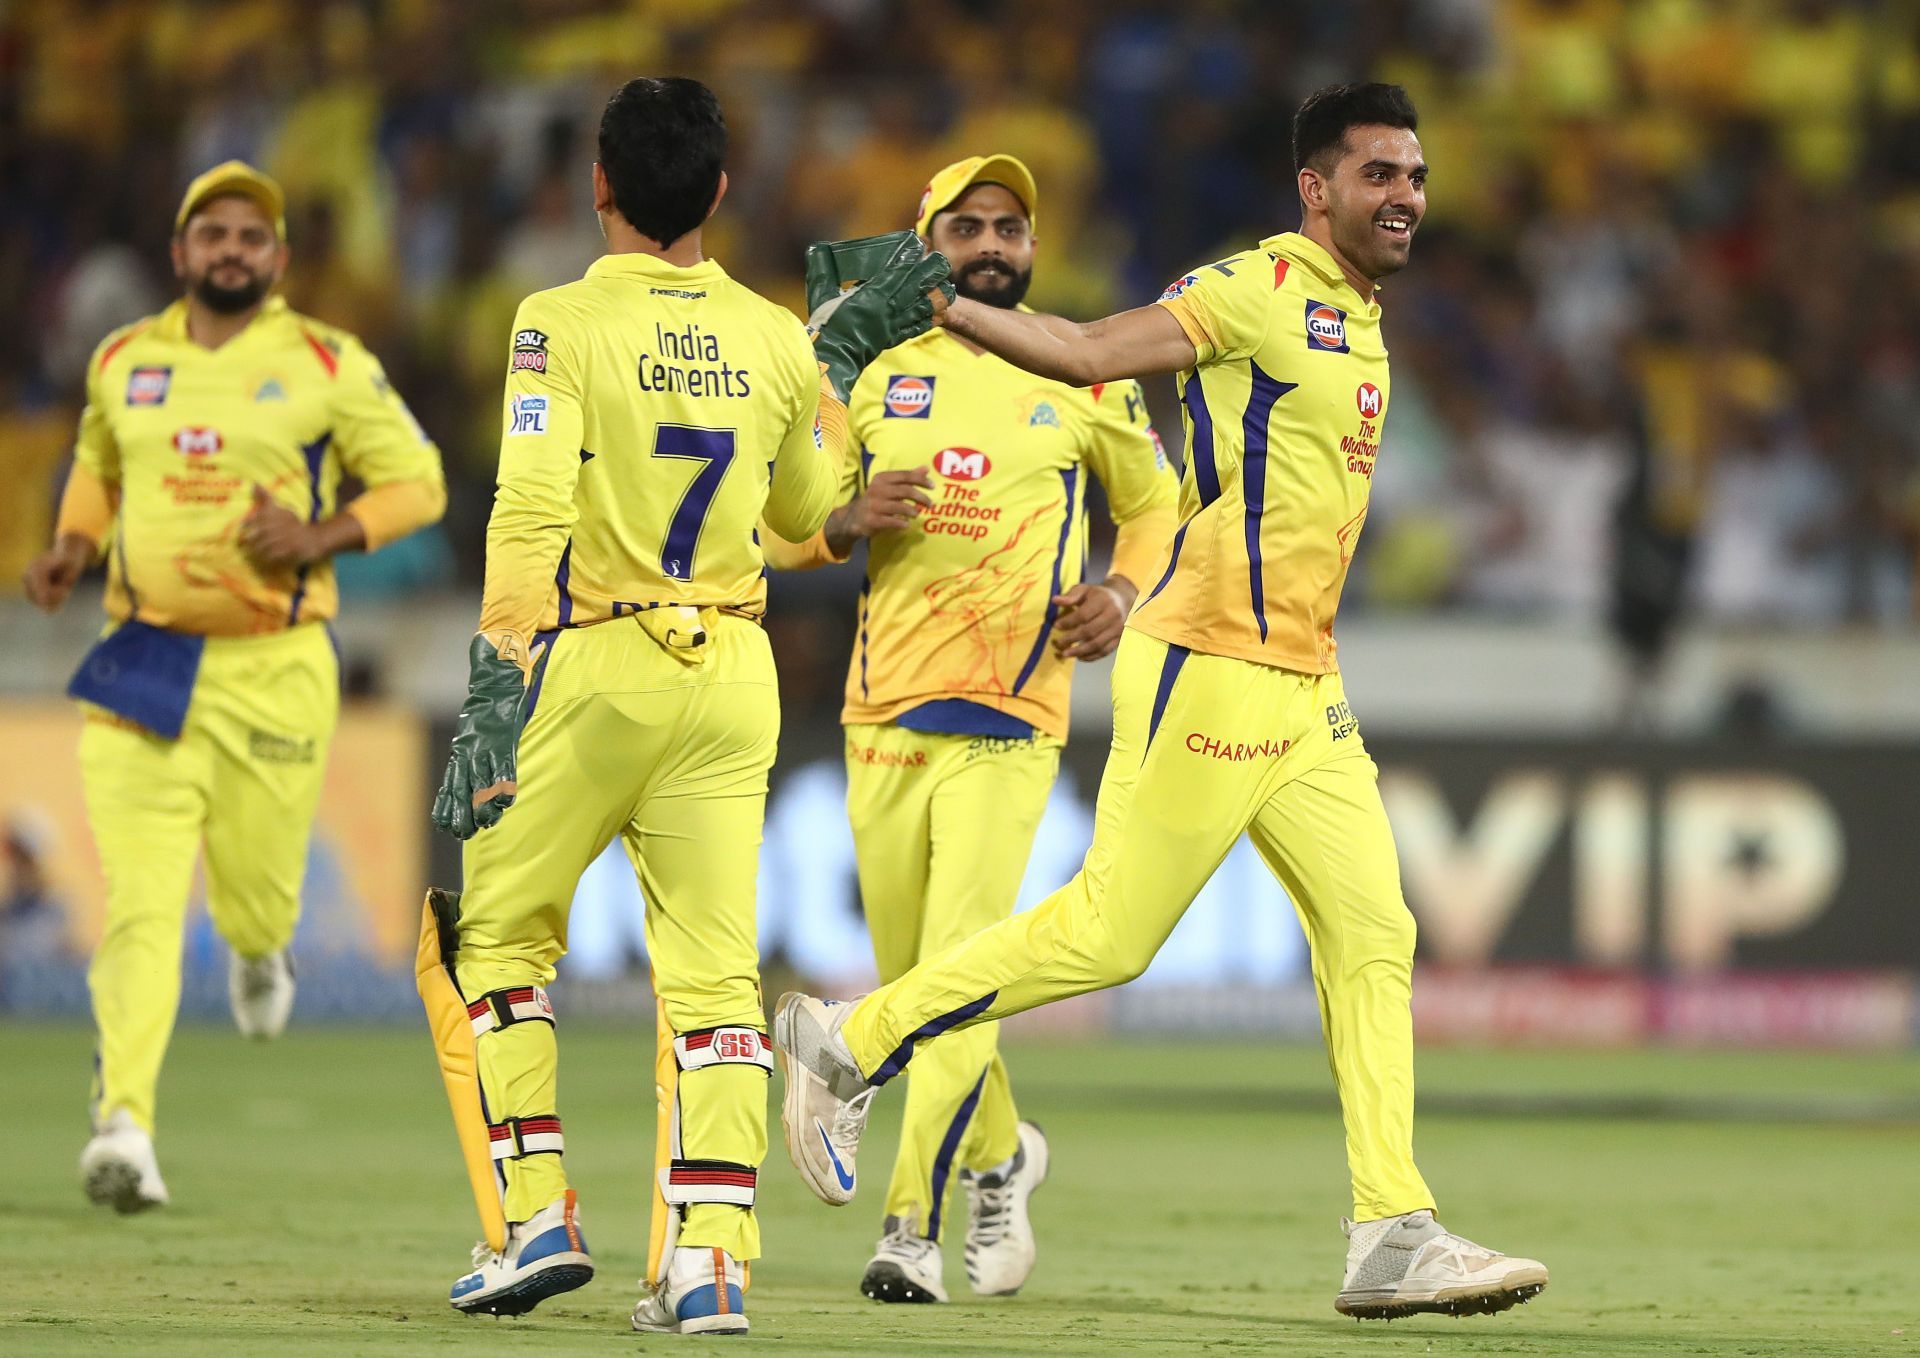 CSK have won the IPL four times under MS Dhoni.